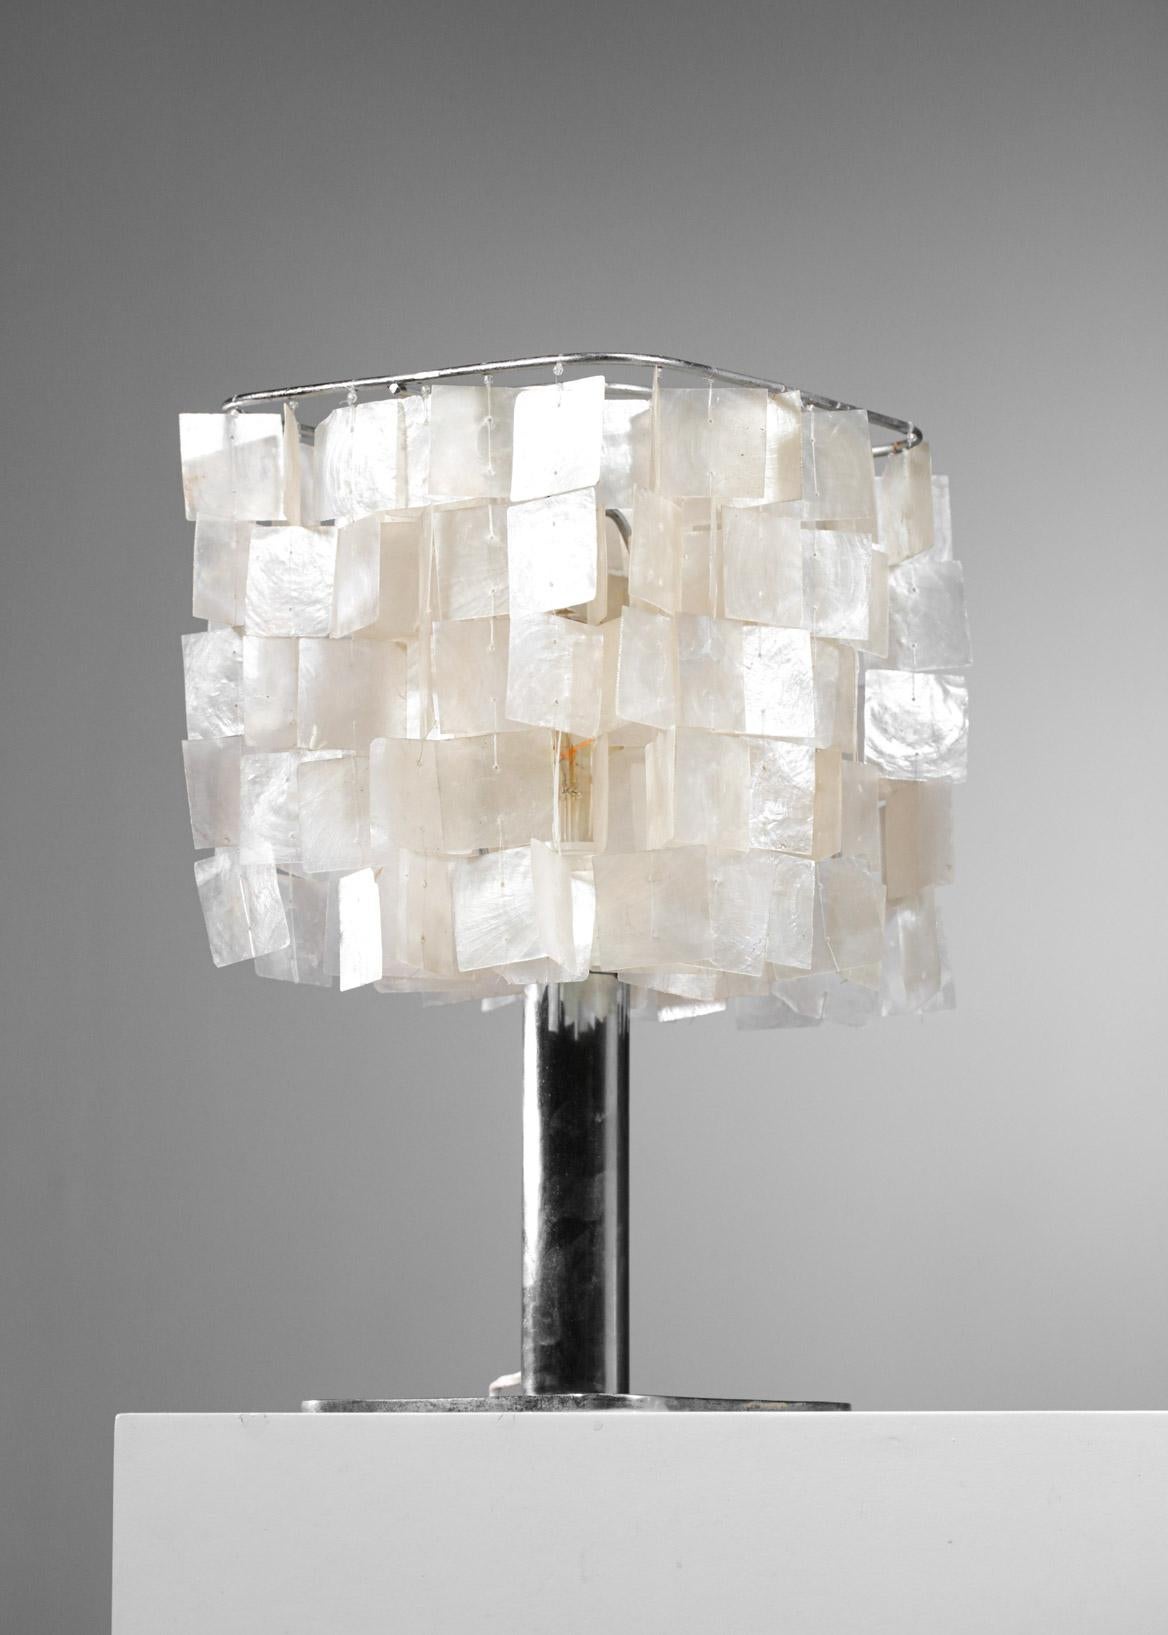 Italian Unique Handmade Table Lamp in Mother of Pearl 70s Style Verner Panton G220 For Sale